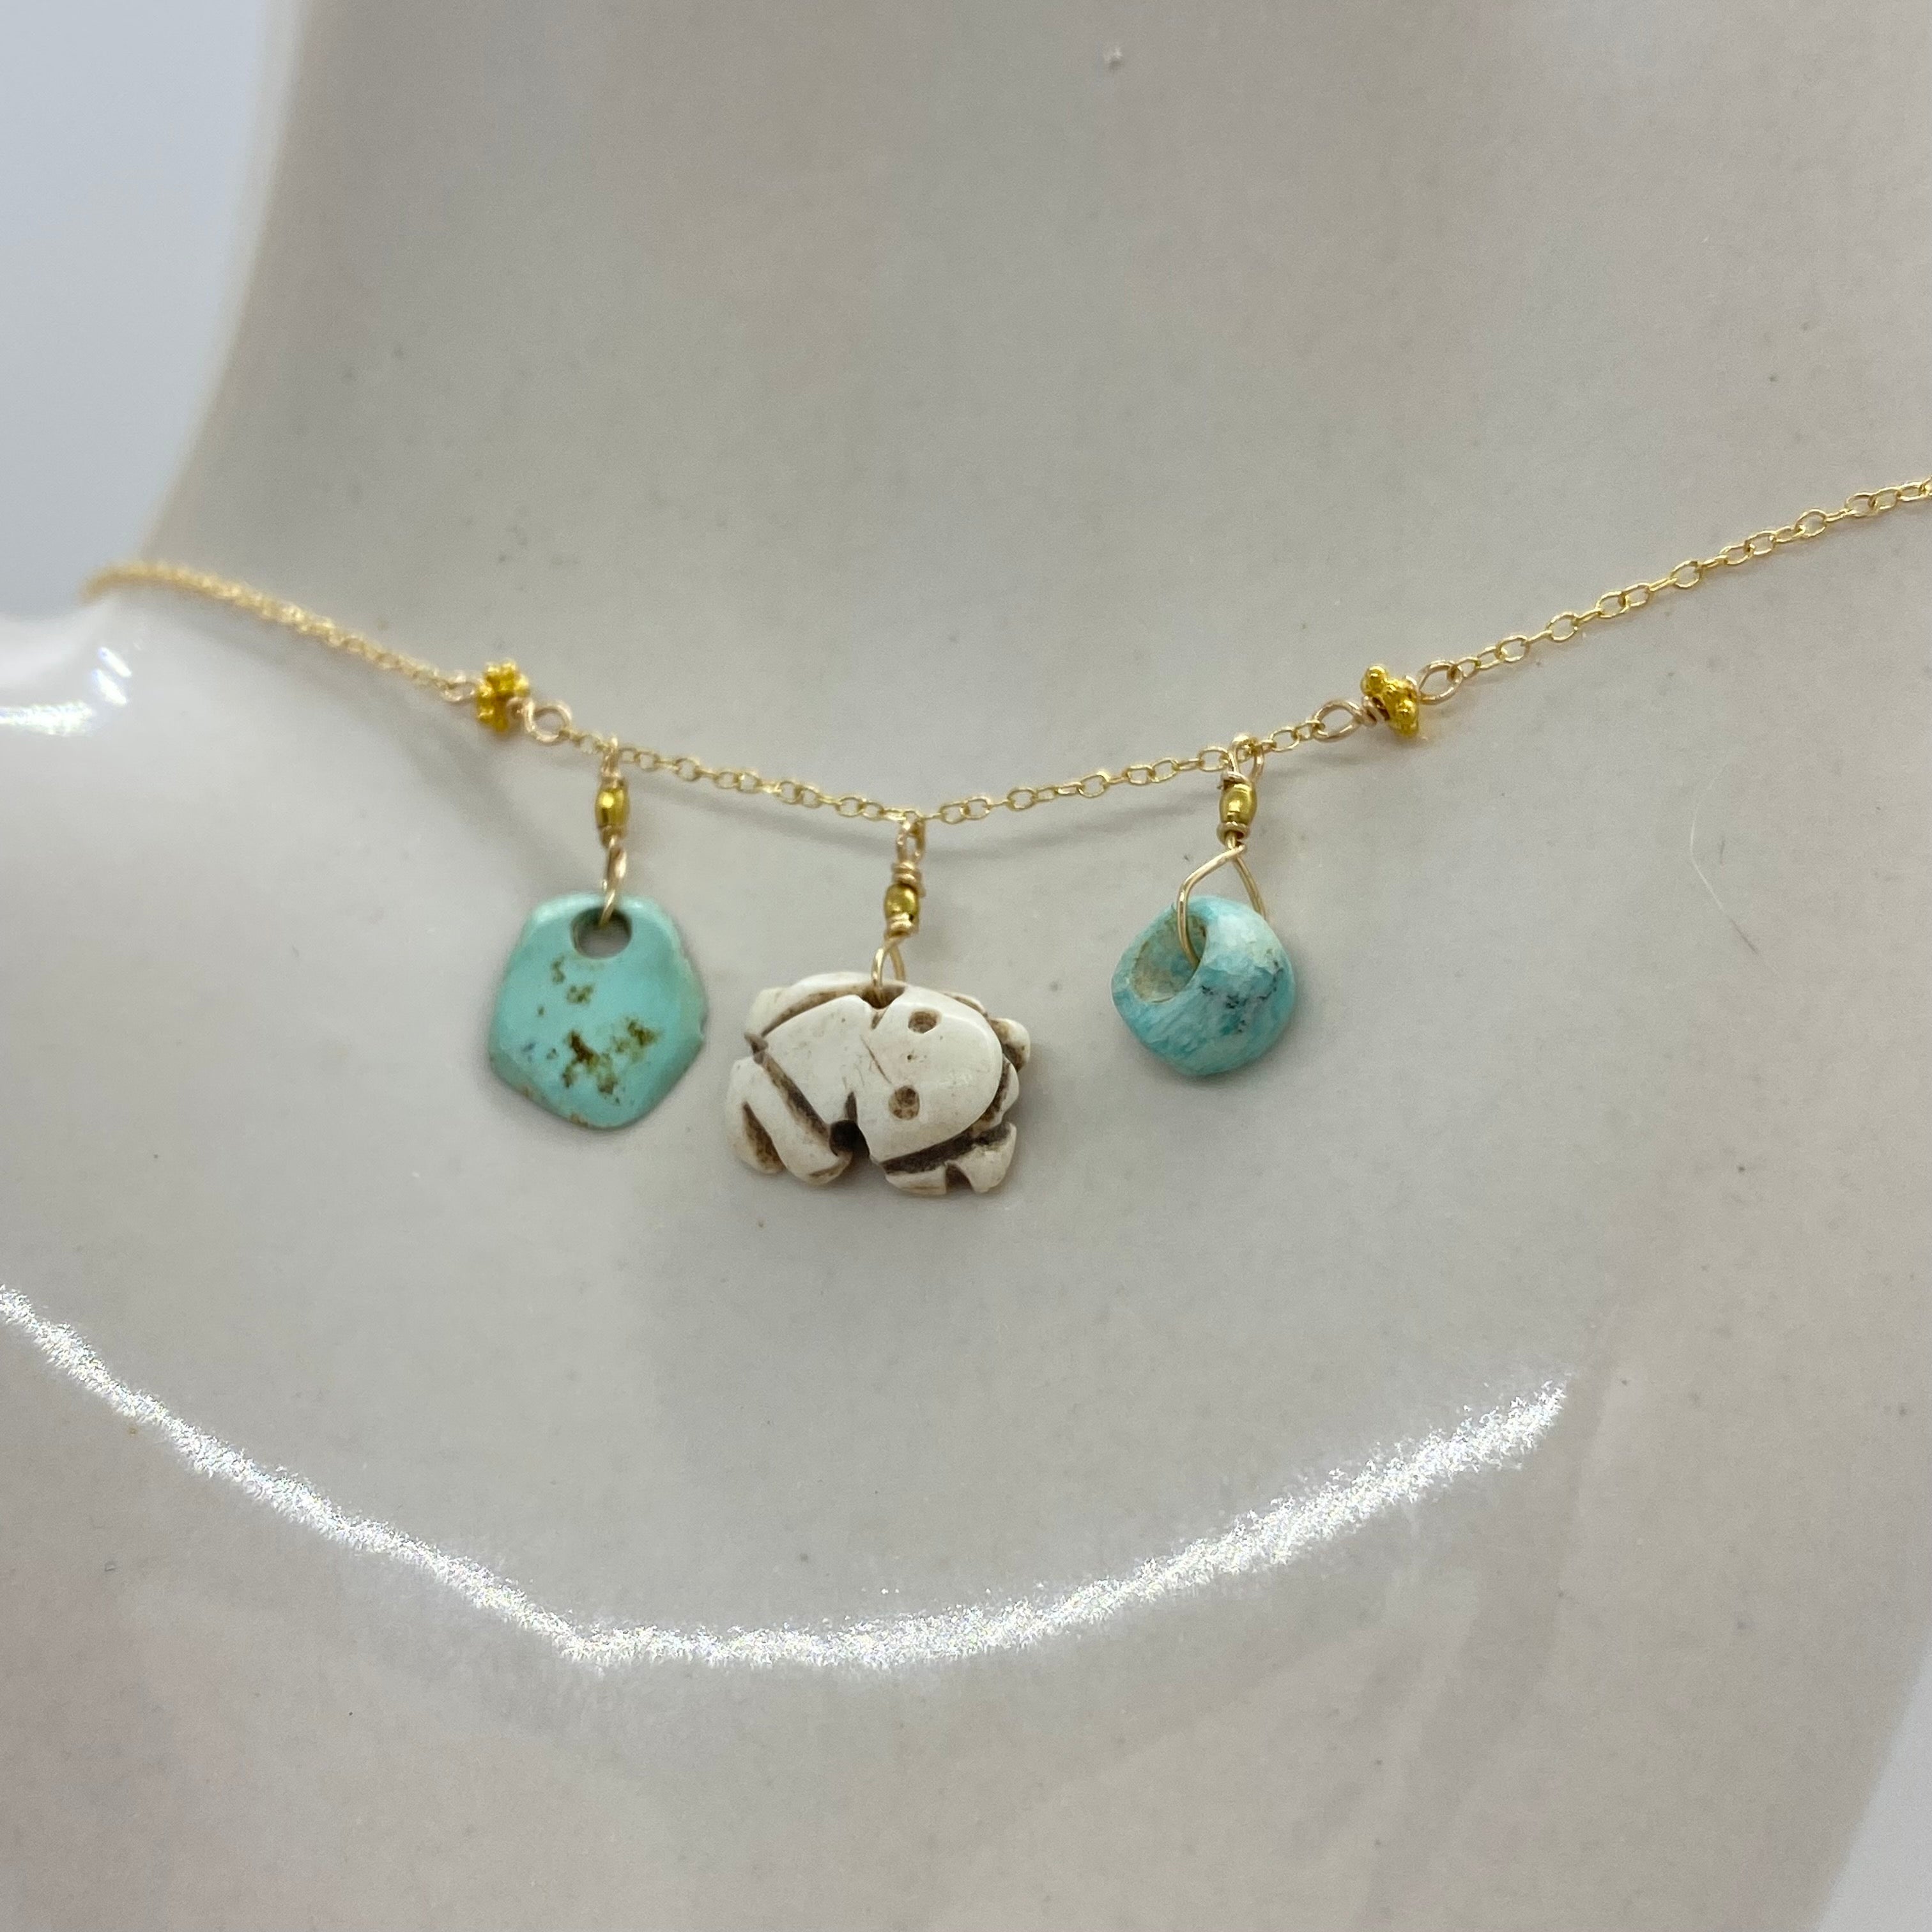 14k Gold Chain Necklace w/ Pre-Columbian Bone Frog Charm, Pre-Columbian Turquoise, 18k Gold Daisies & 18k Gold Nuggets